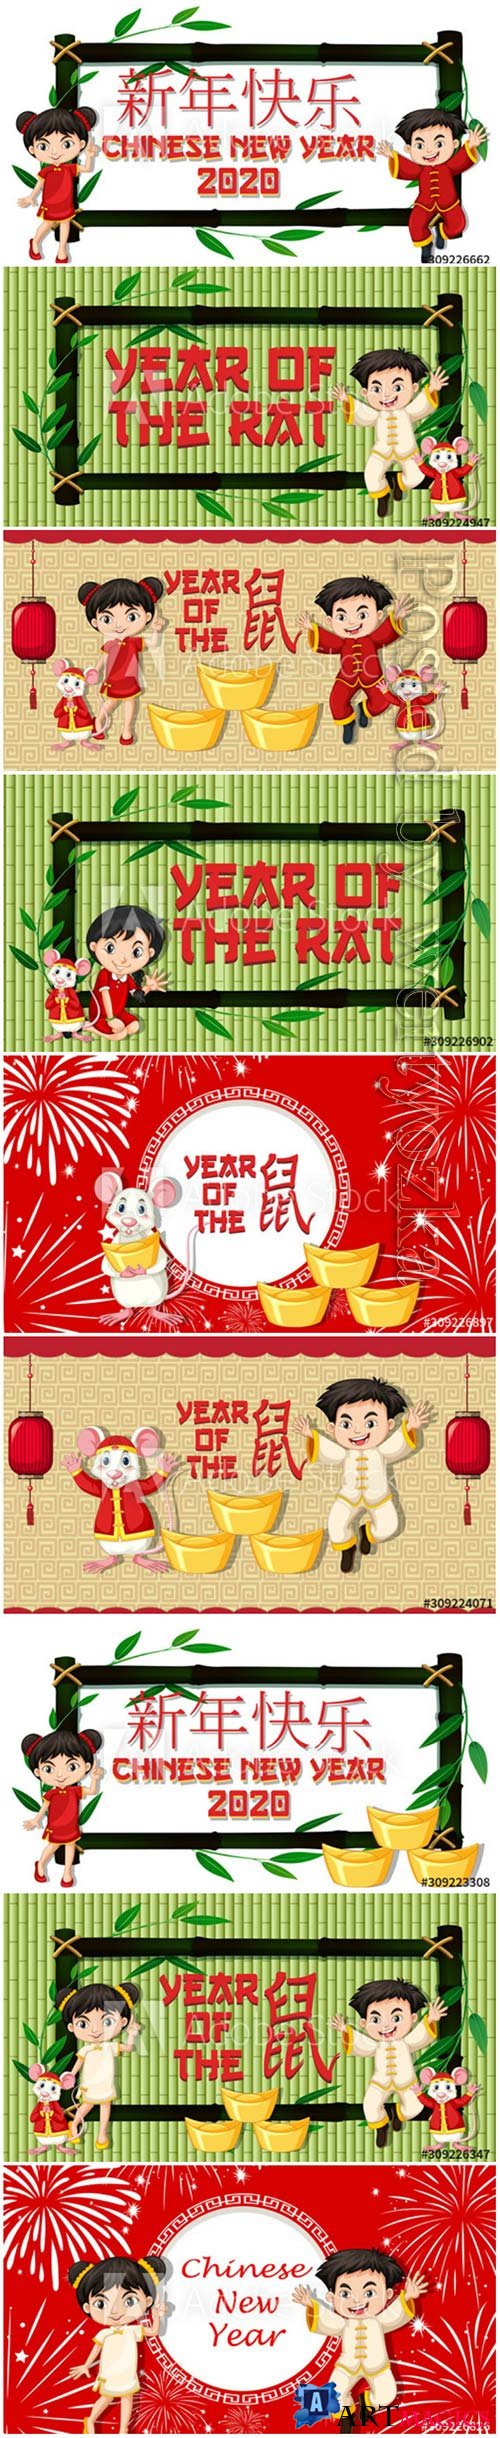 New Year card template with chinese kids and rats